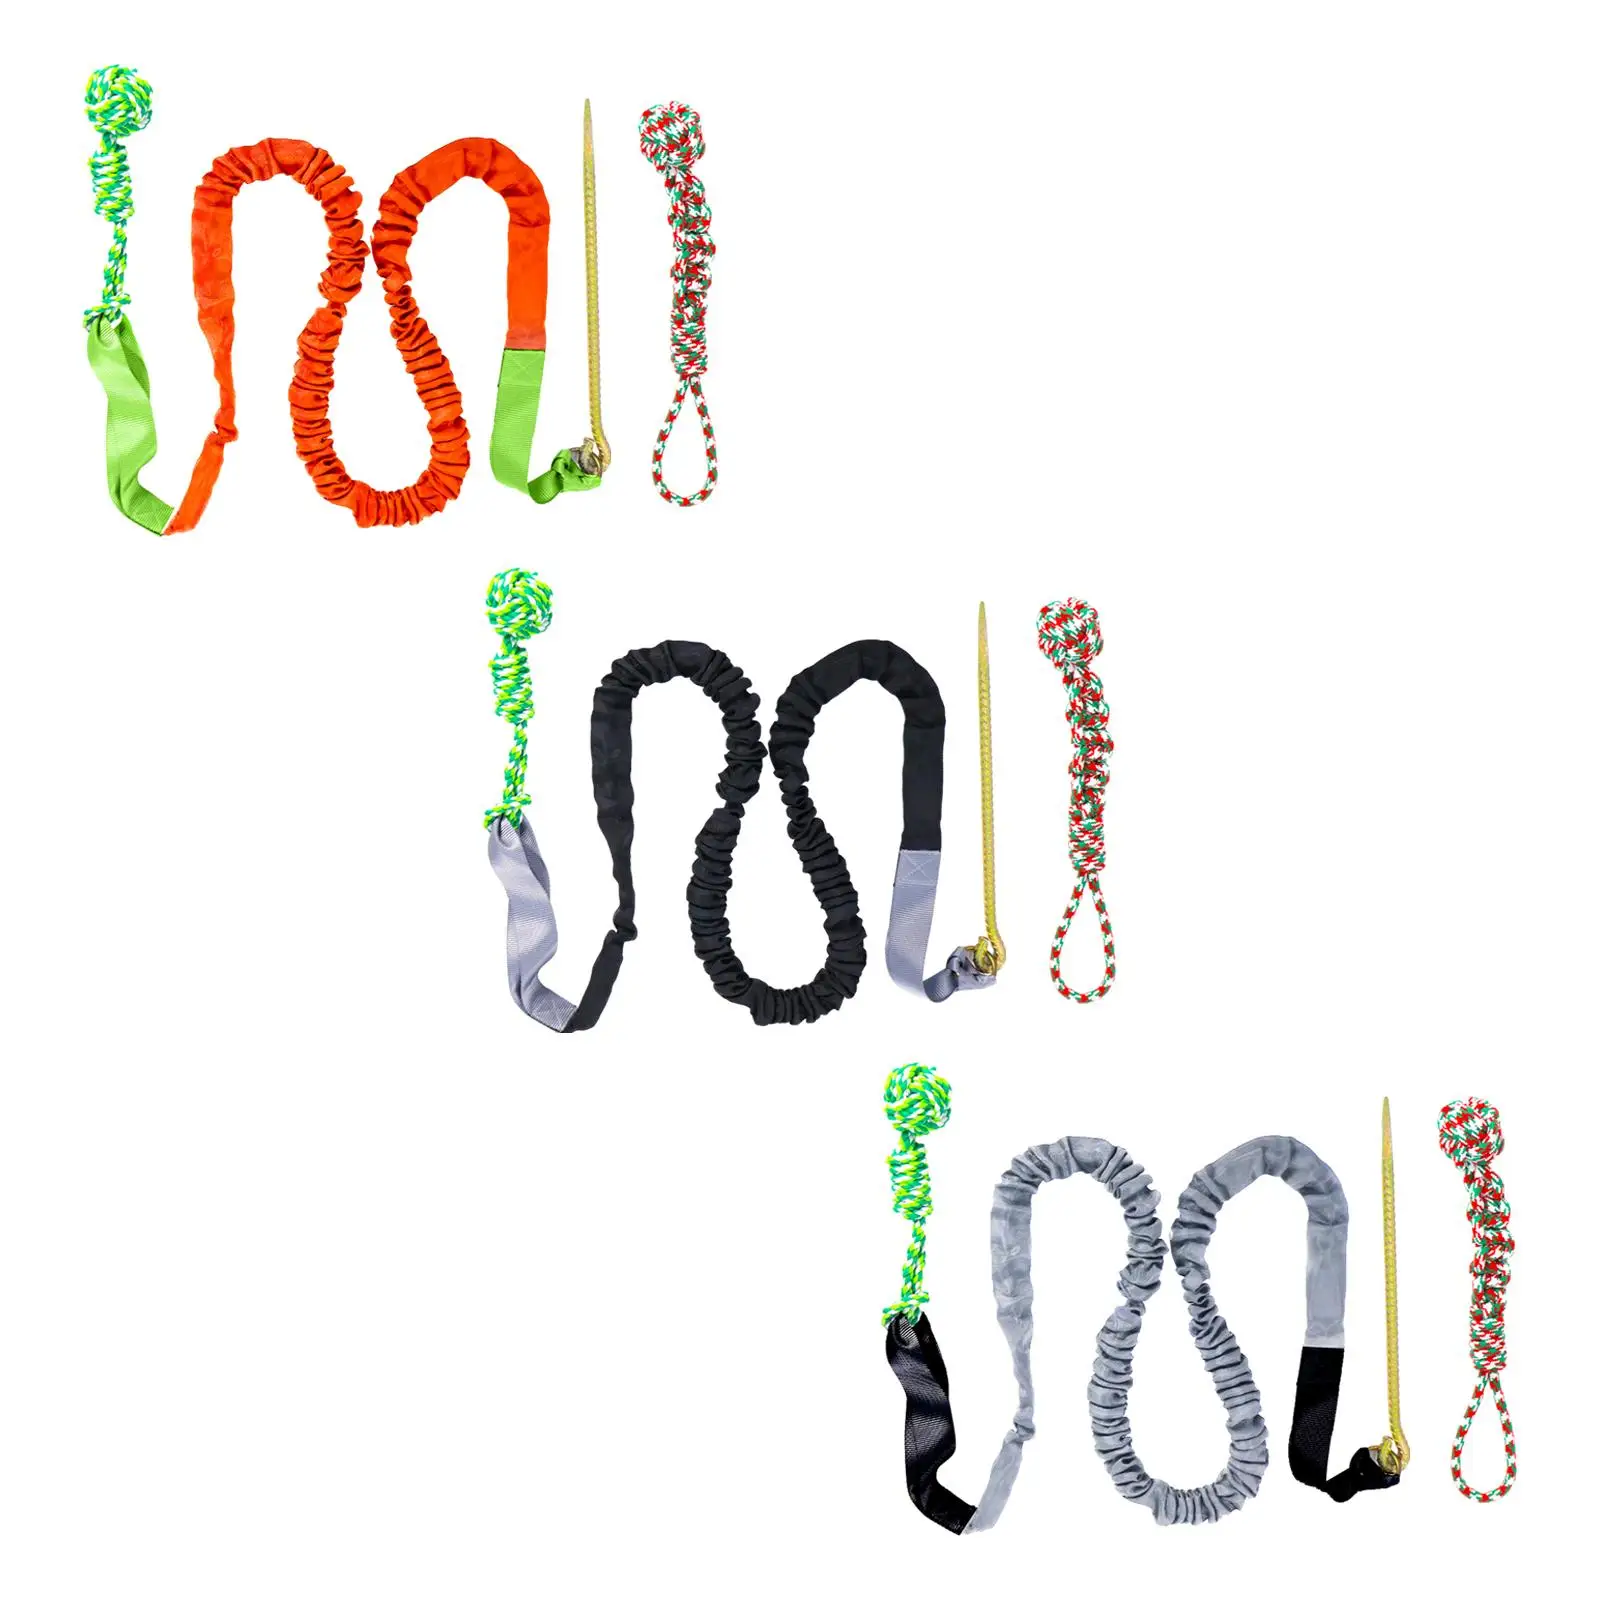 Dog Chew Rope Toy Dog Tug of War Rope Toys Hanging from Trees Dog Toy Durable